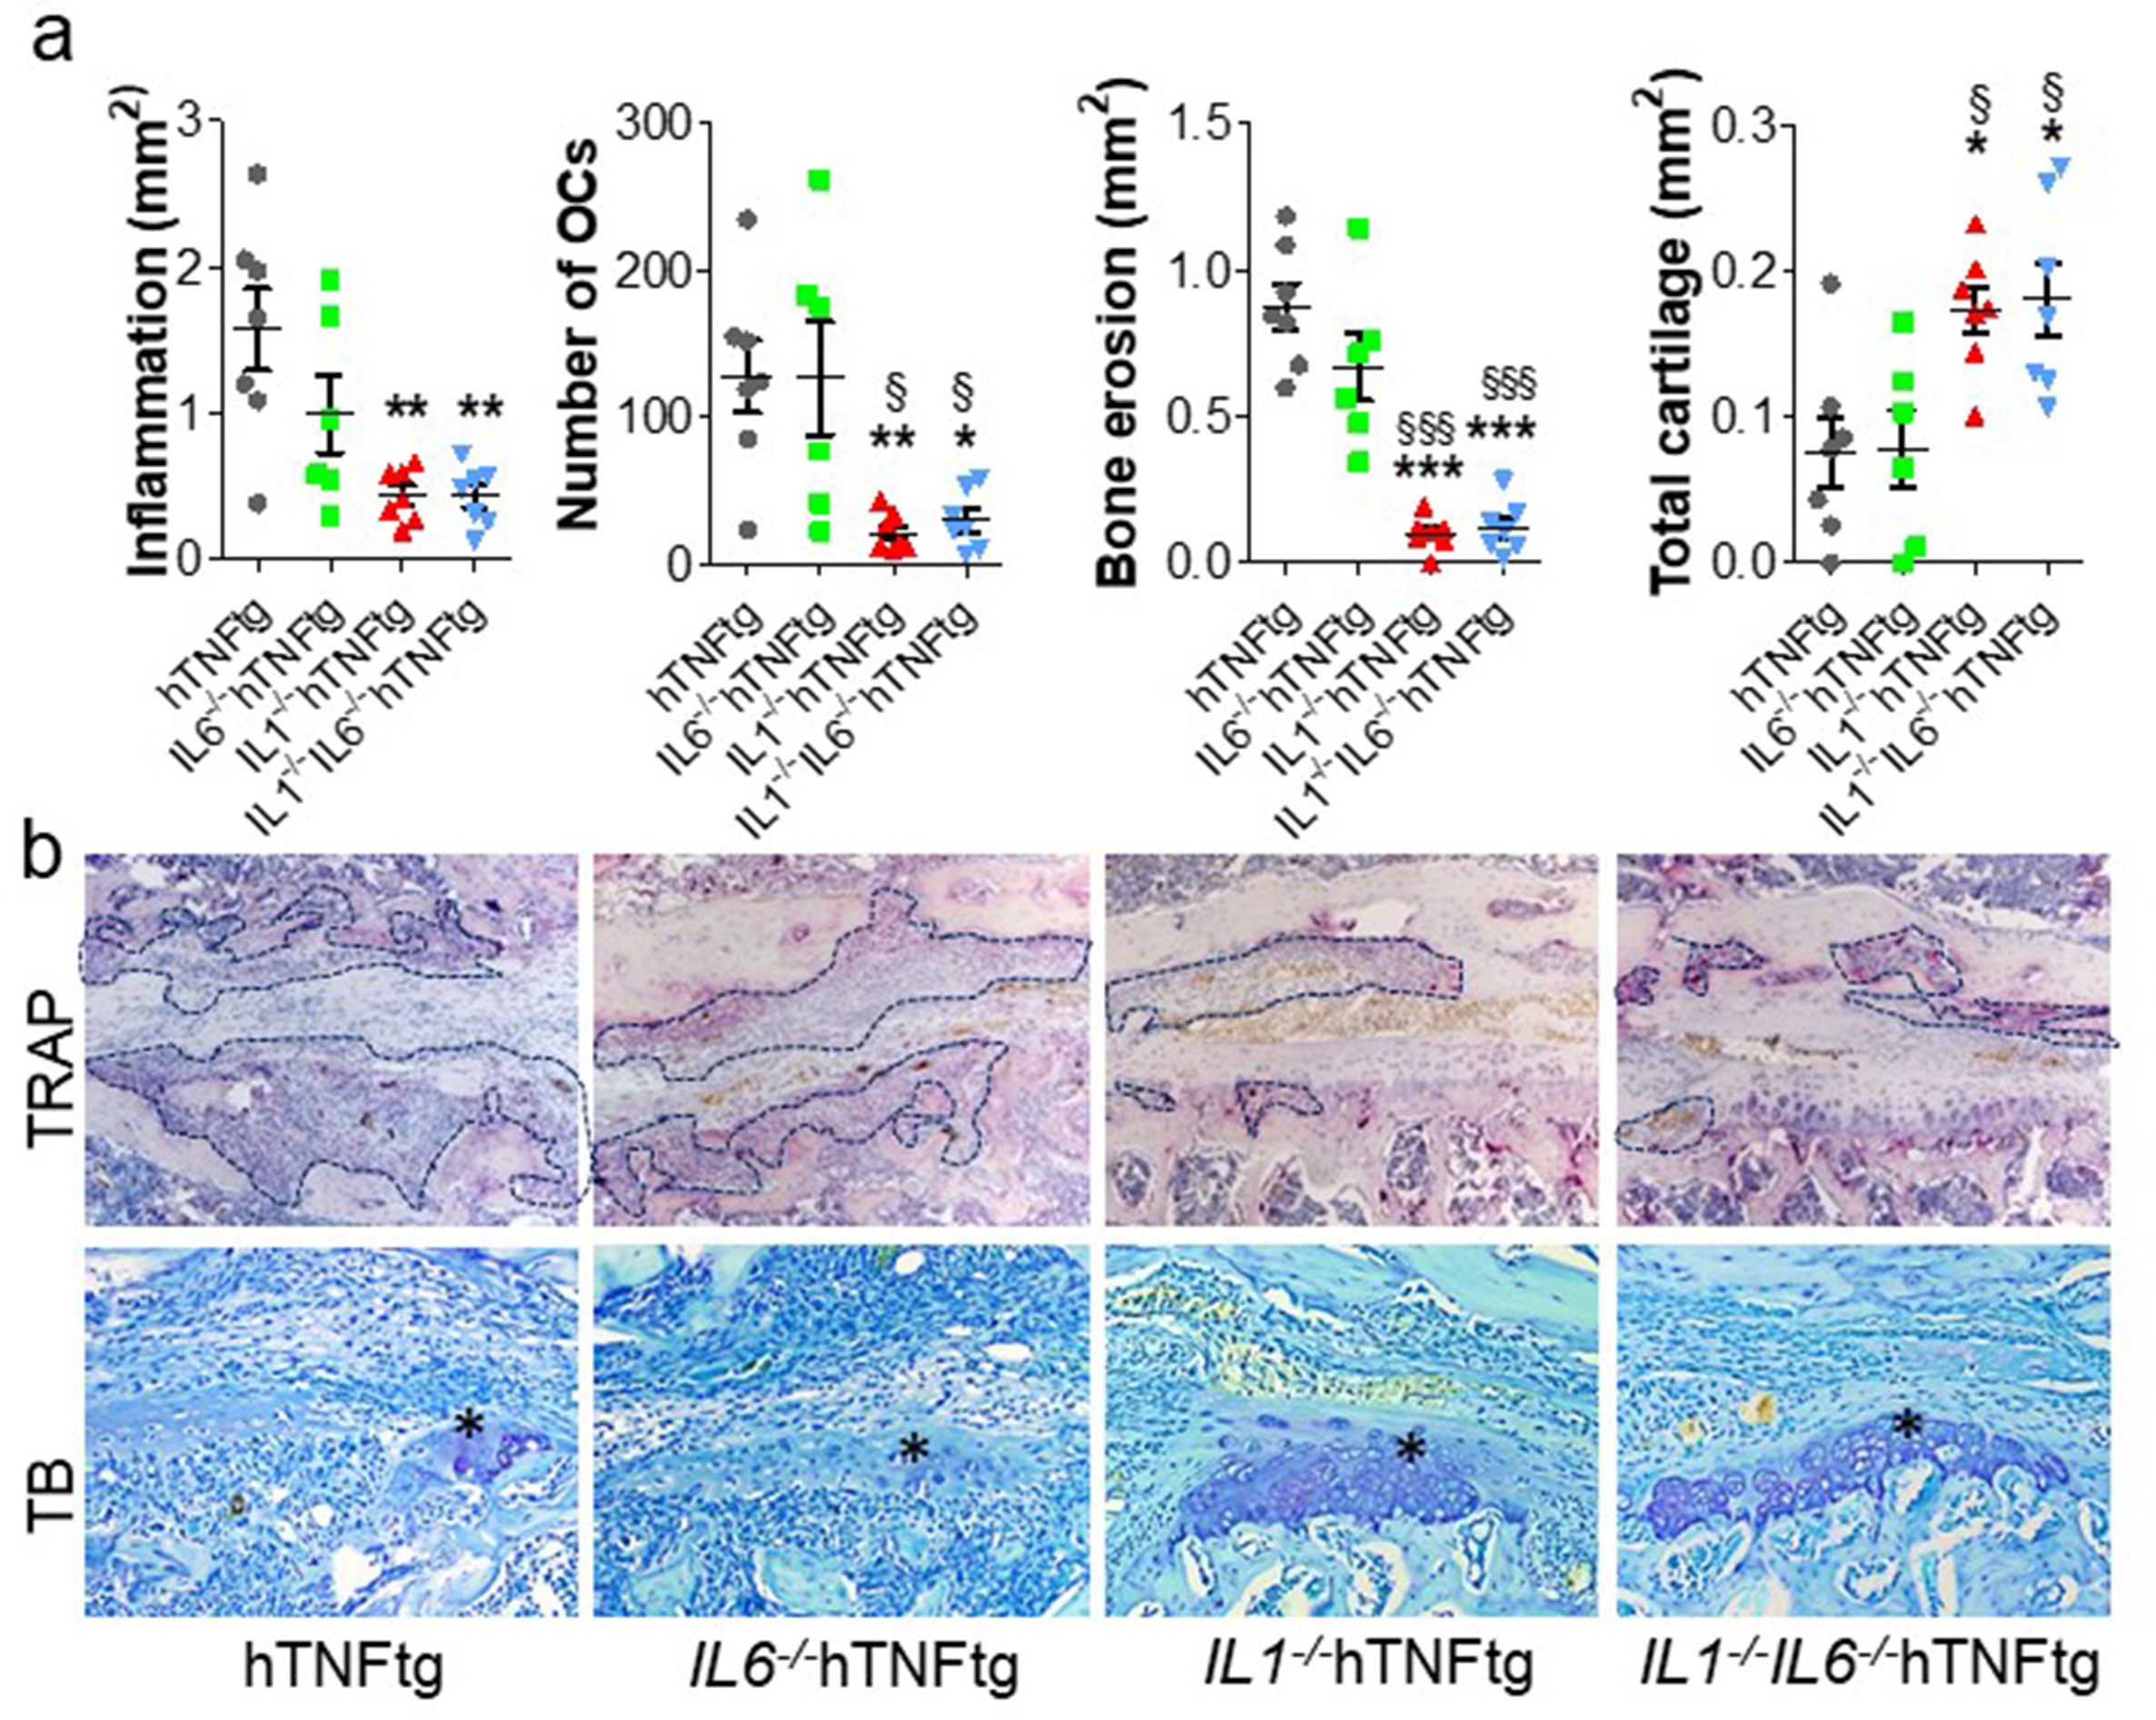 Fig. 4 
            Histopathological analysis of bilateral erosive sacroiliitis in 15-week-old IL1-/-IL6-/-hTNFtg, IL1-/-hTNFtg, IL6-/-hTNFtg, and hTNFtg mice. a) Quantitative assessment of the area of inflammation (in mm2), the number of osteoclasts (OCs), area of bone erosions (in mm2), and cartilage tissue (in mm2) assessed in both left and right sacroiliac joints. b) Representative images from tartrate-resistant acid phosphatase (TRAP) (upper row) and toluidine blue (TB) (lower row) stained sections of sacroiliac joints indicating inflammation, pannus formation (black dotted lines), erosions, and osteoclast and cartilage degradation (asterisk). Data are expressed as mean (standard error of the mean (SEM)). N = 7 to 8 animals per group. Symbols indicate statistical significance compared to * hTNFtg and § IL6-/-hTNFtg (*p < 0.05, **p < 0.005, ***p < 0.001; §p < 0.05, §§p < 0.005, §§§p < 0.001). All p-values calculated using one-way analysis of variance (ANOVA) and Tukey’s post hoc test. hTNFtg, human tumour necrosis factor transgenic; IL, interleukin.
          